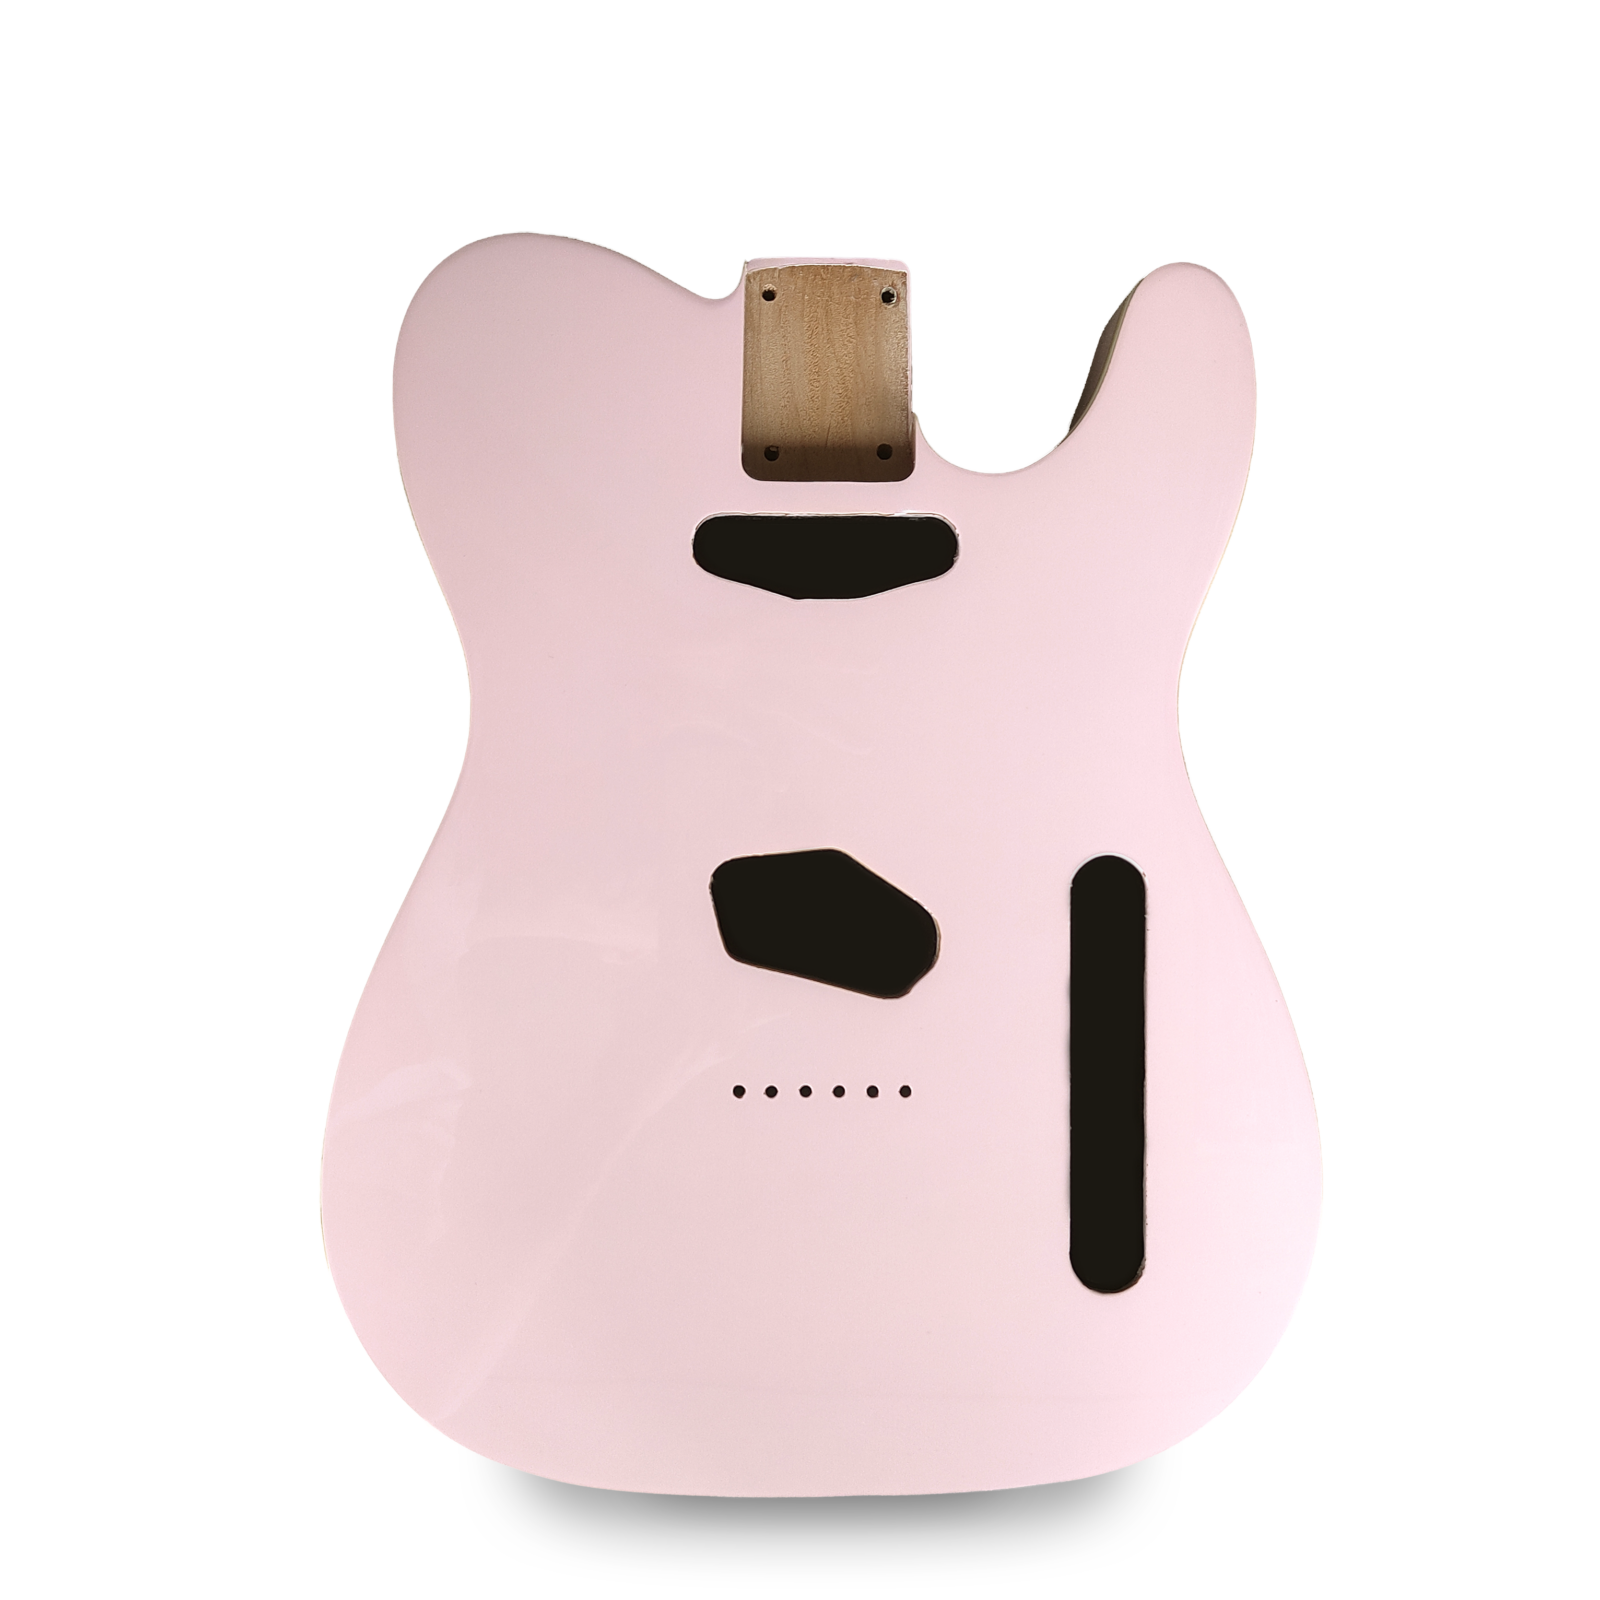 Telecaster Guitar Body - Shell Pink with Vintage Cream Binding - 2 